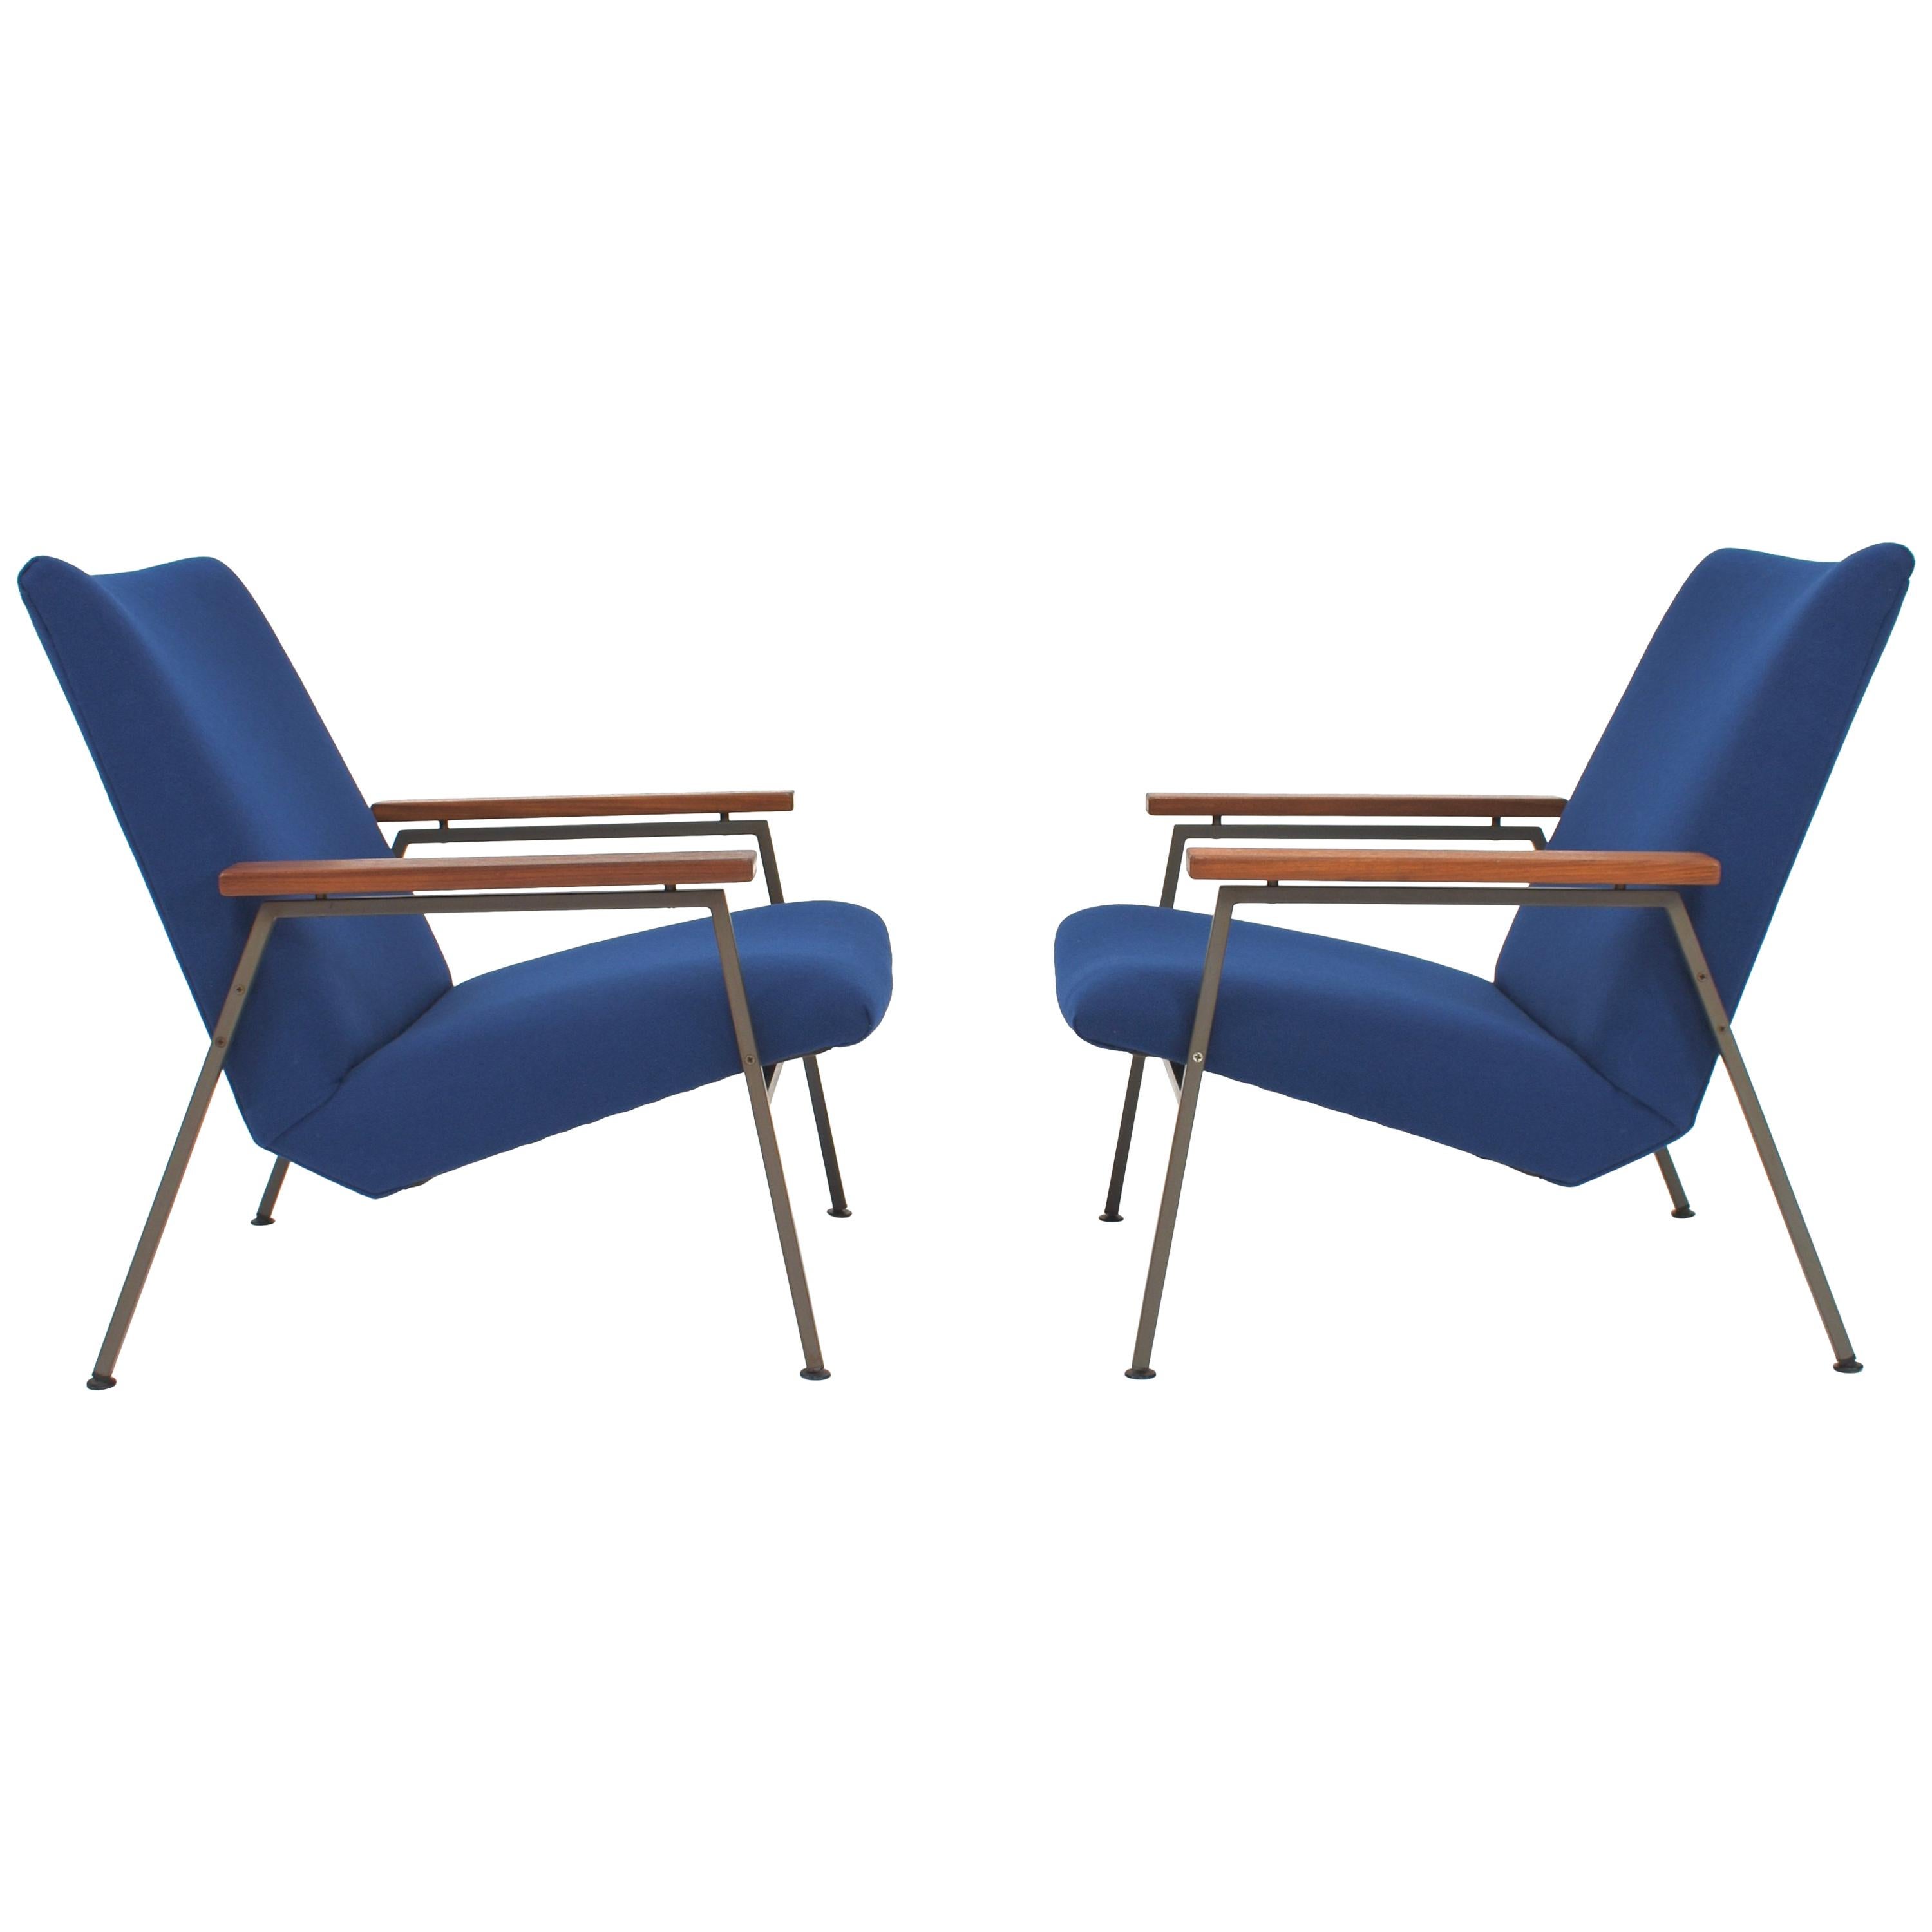 Pair of Rob Parry Lounge Armchairs with New Kvadrat Upholstery, circa 1950